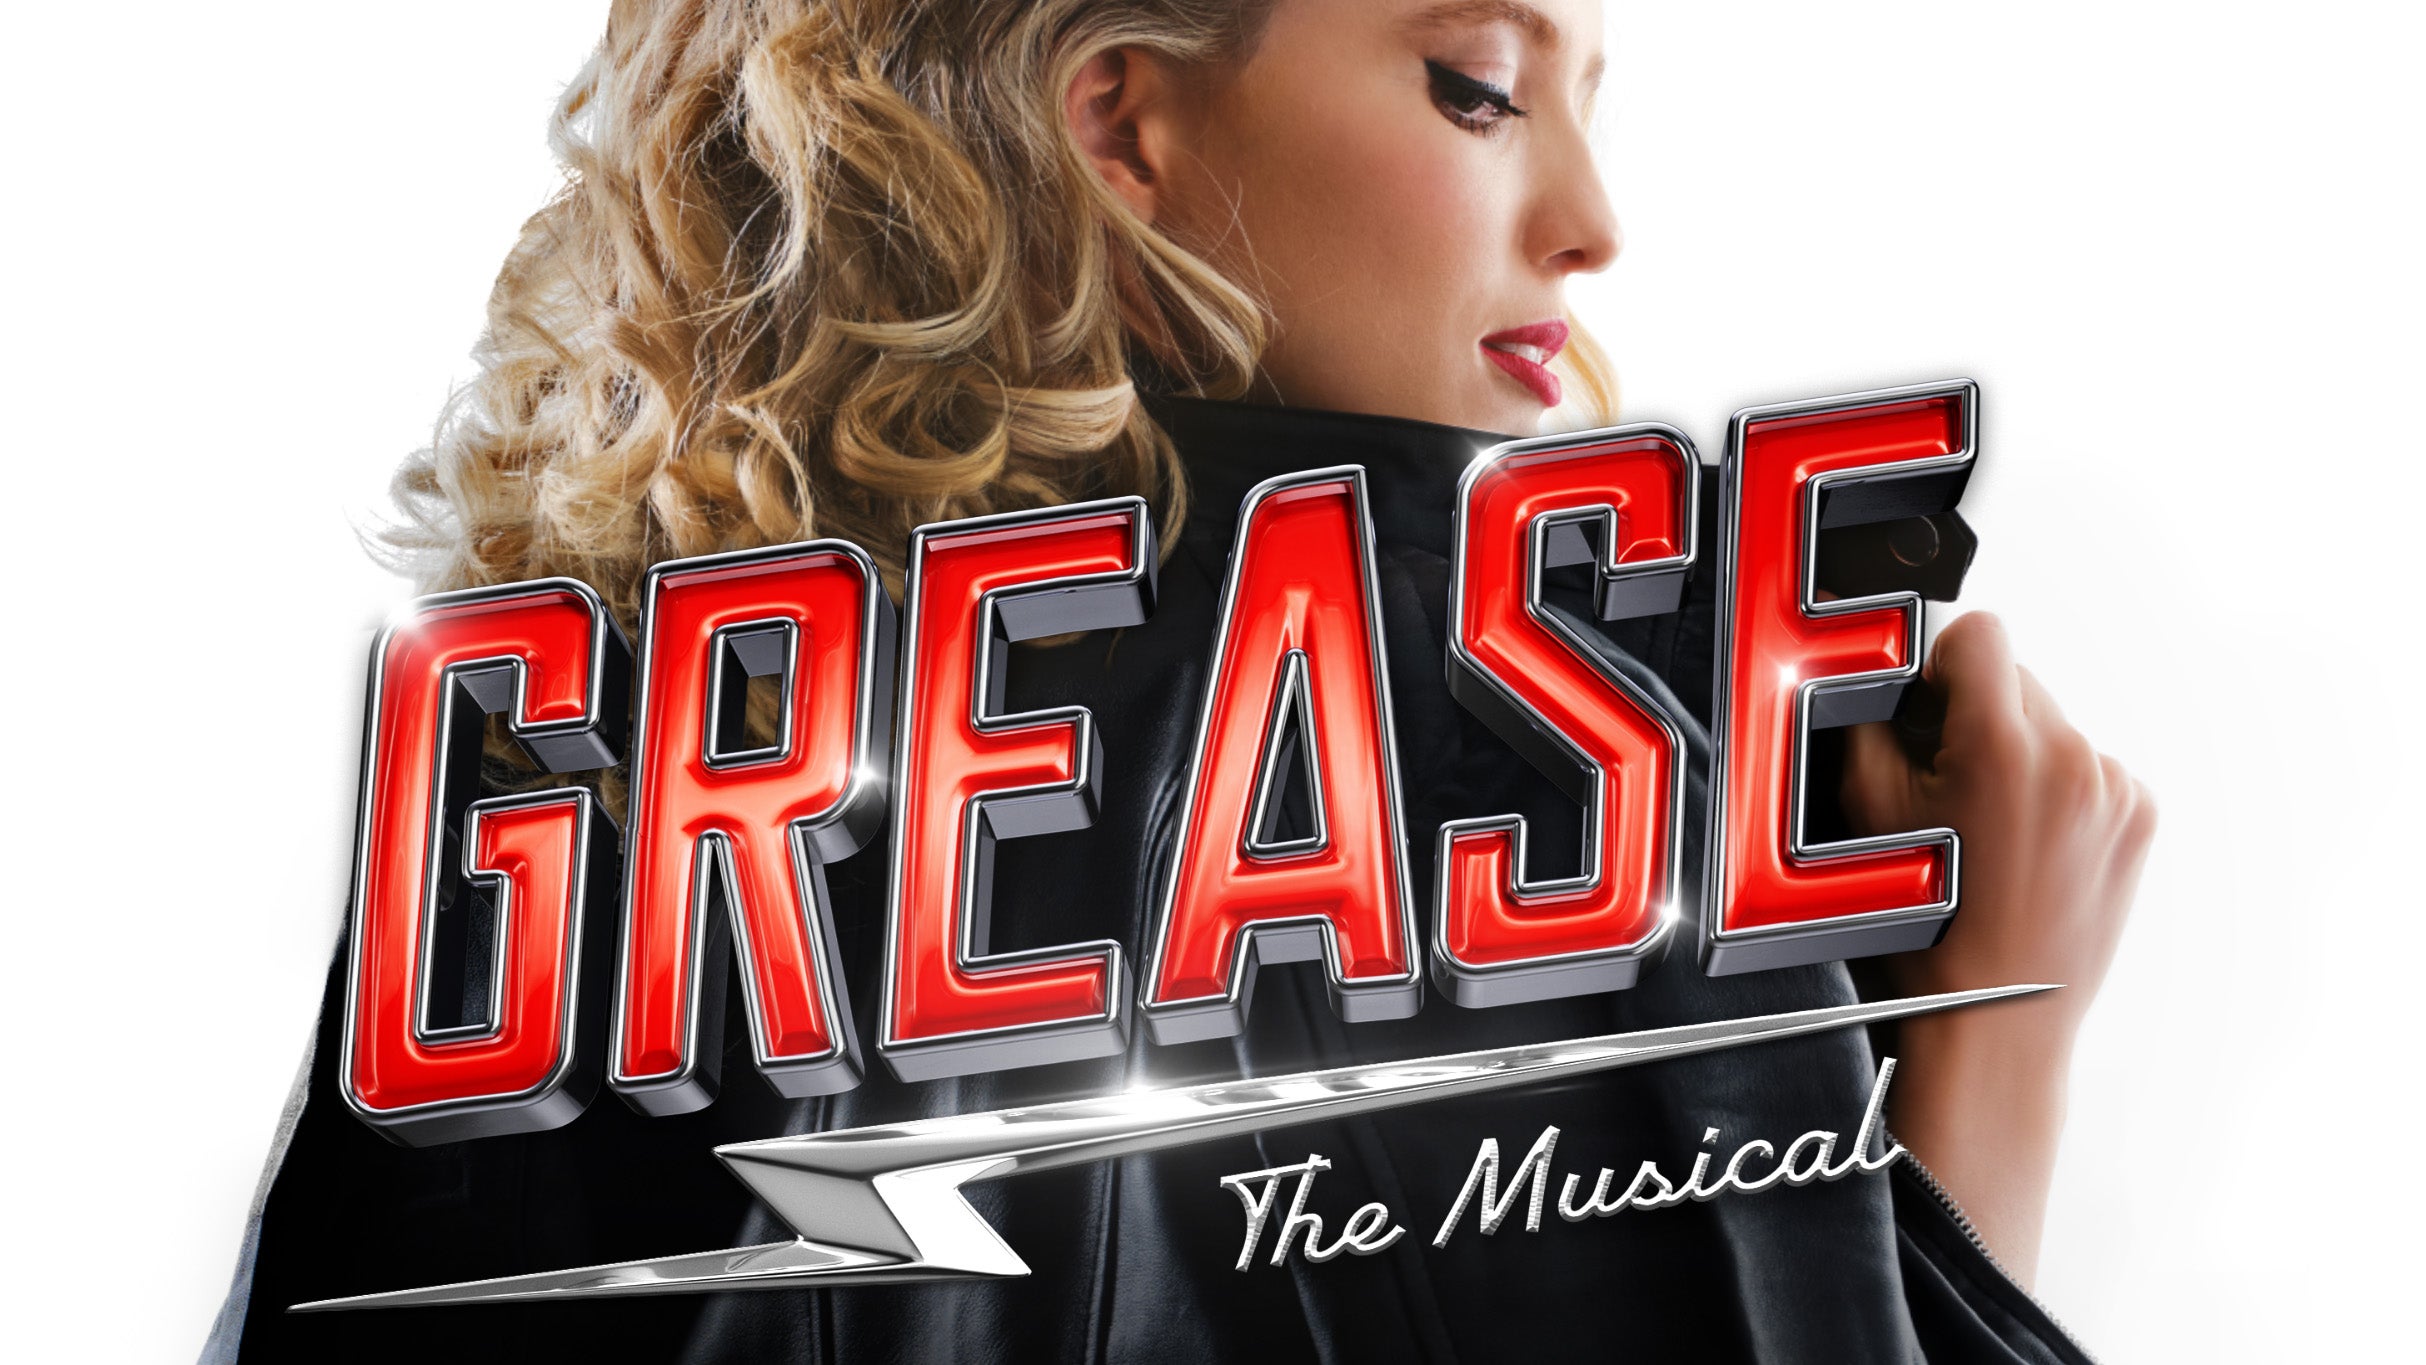 Grease in Haymarket promo photo for Exclusive presale offer code